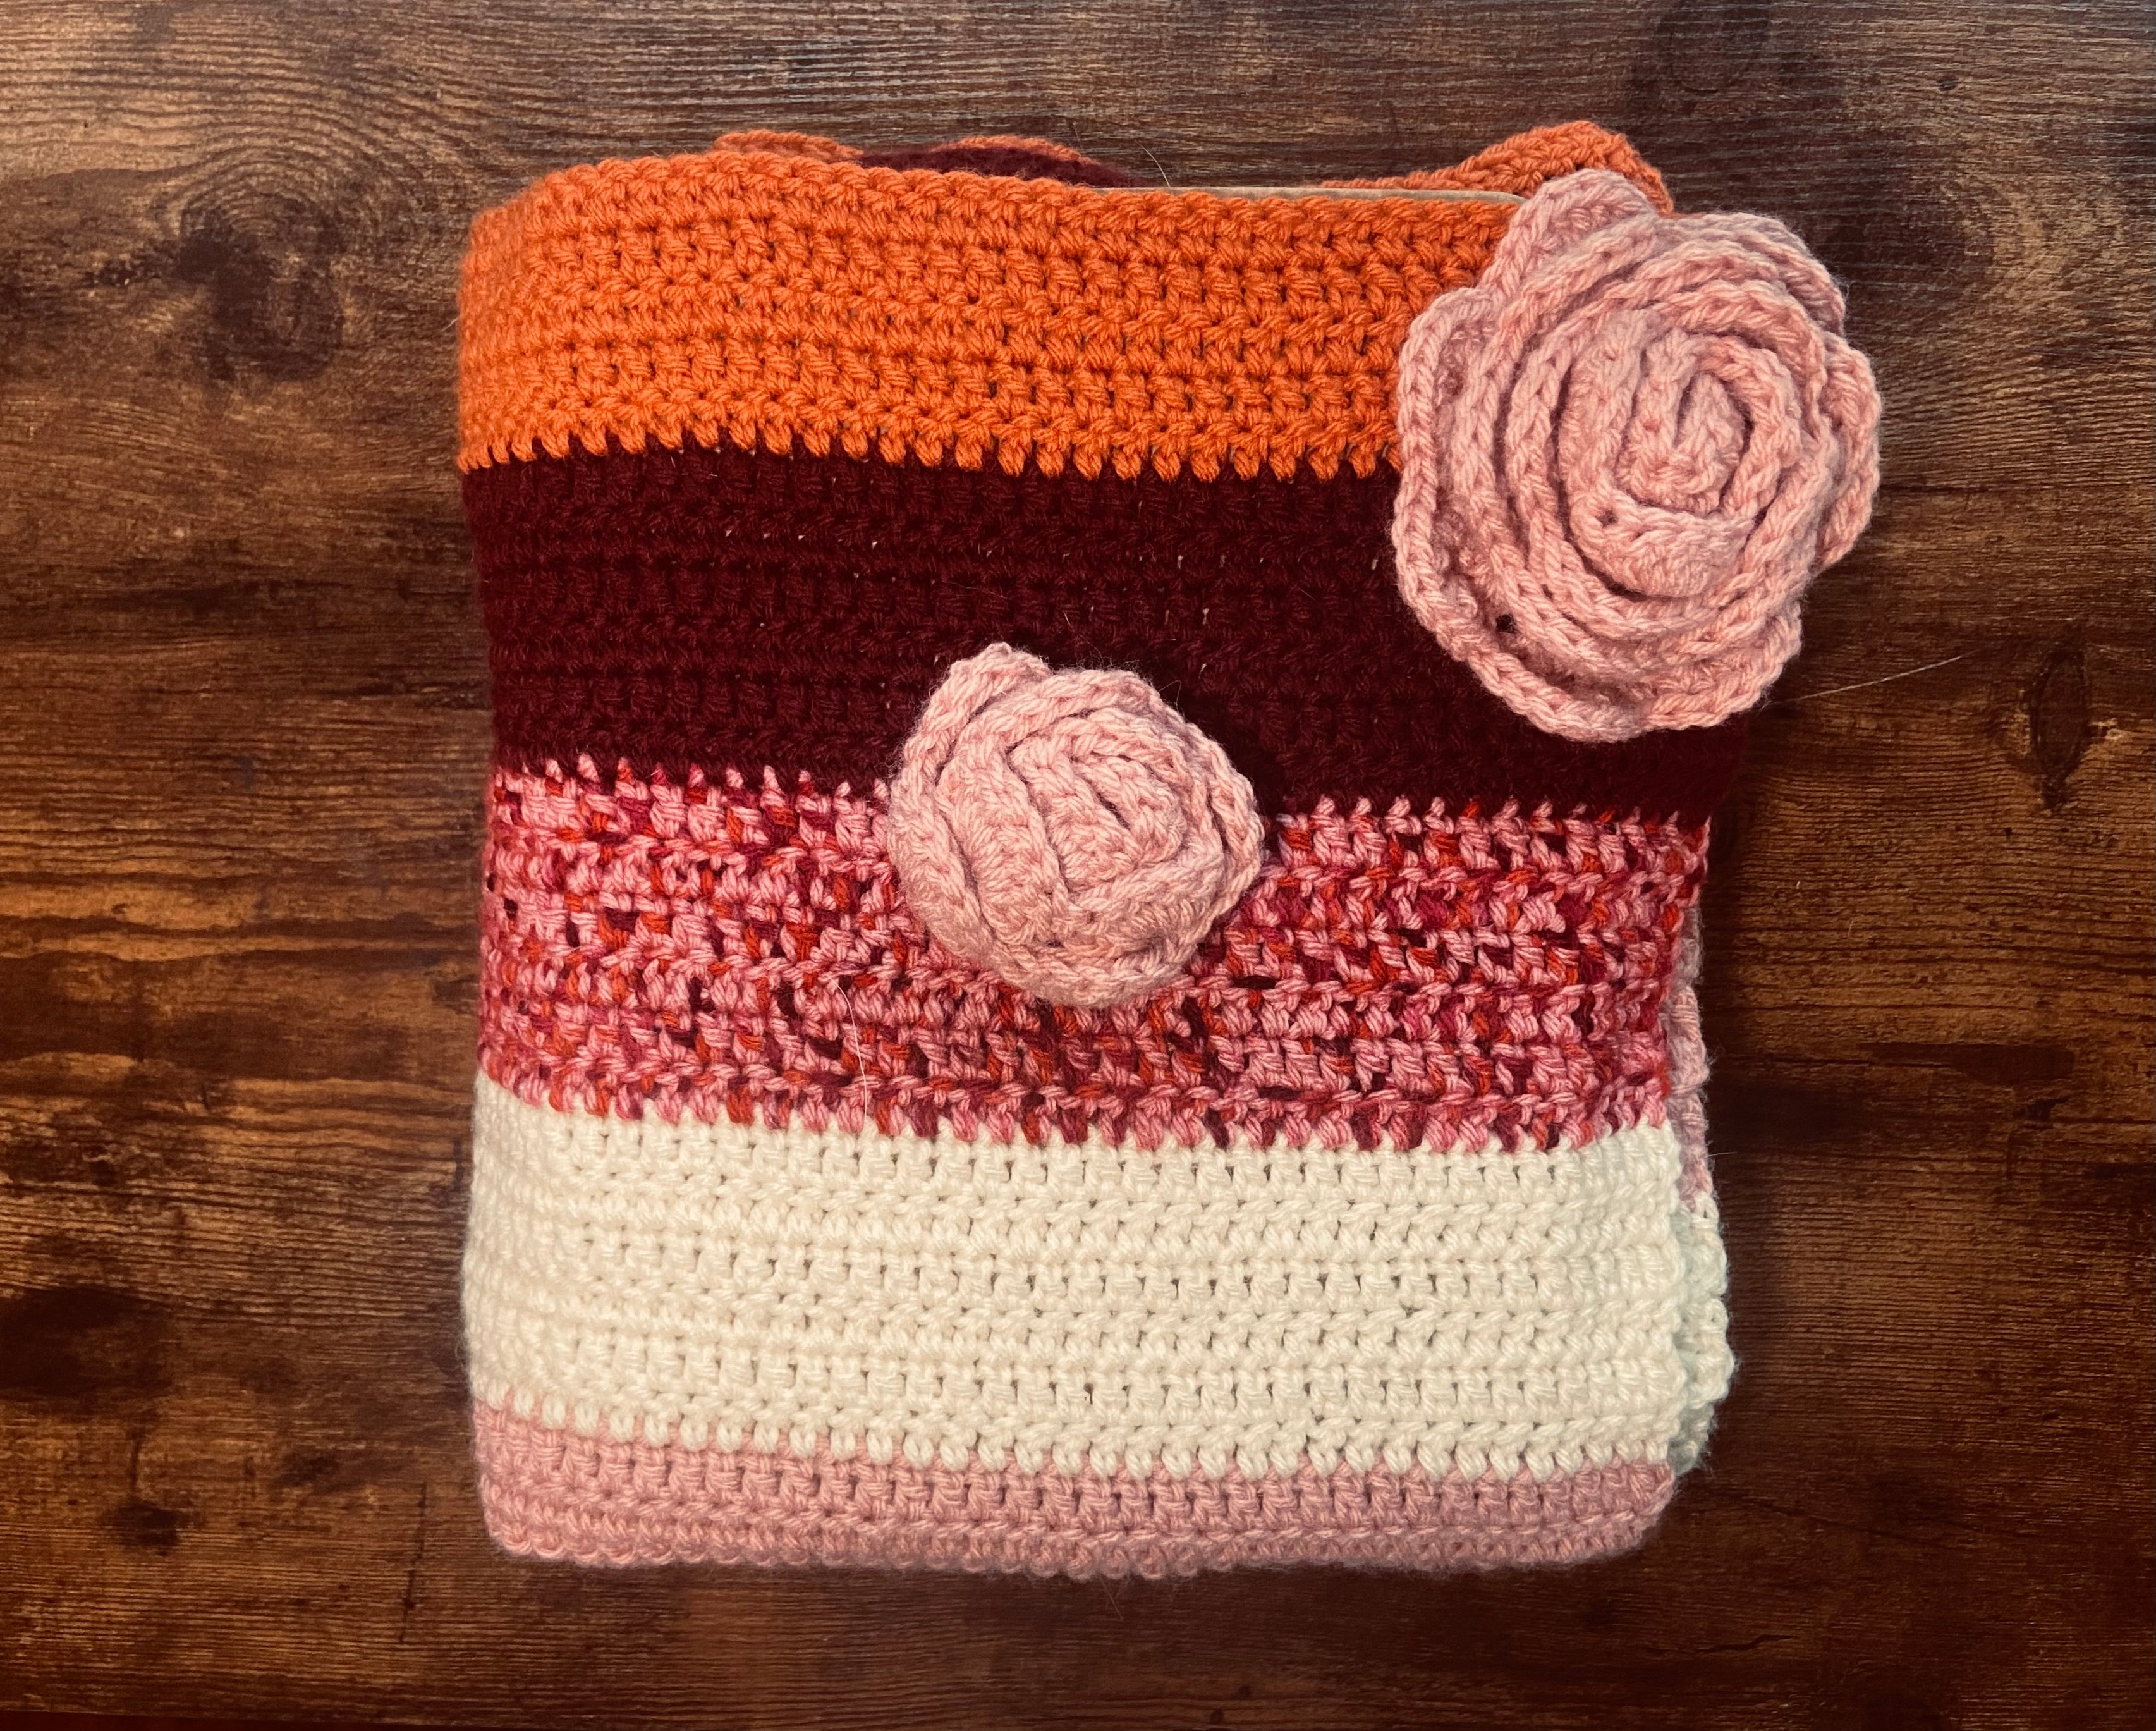 folded crochet blanket with stripes of orange, burgundy, pink, and white and light pink crochet flowers on top